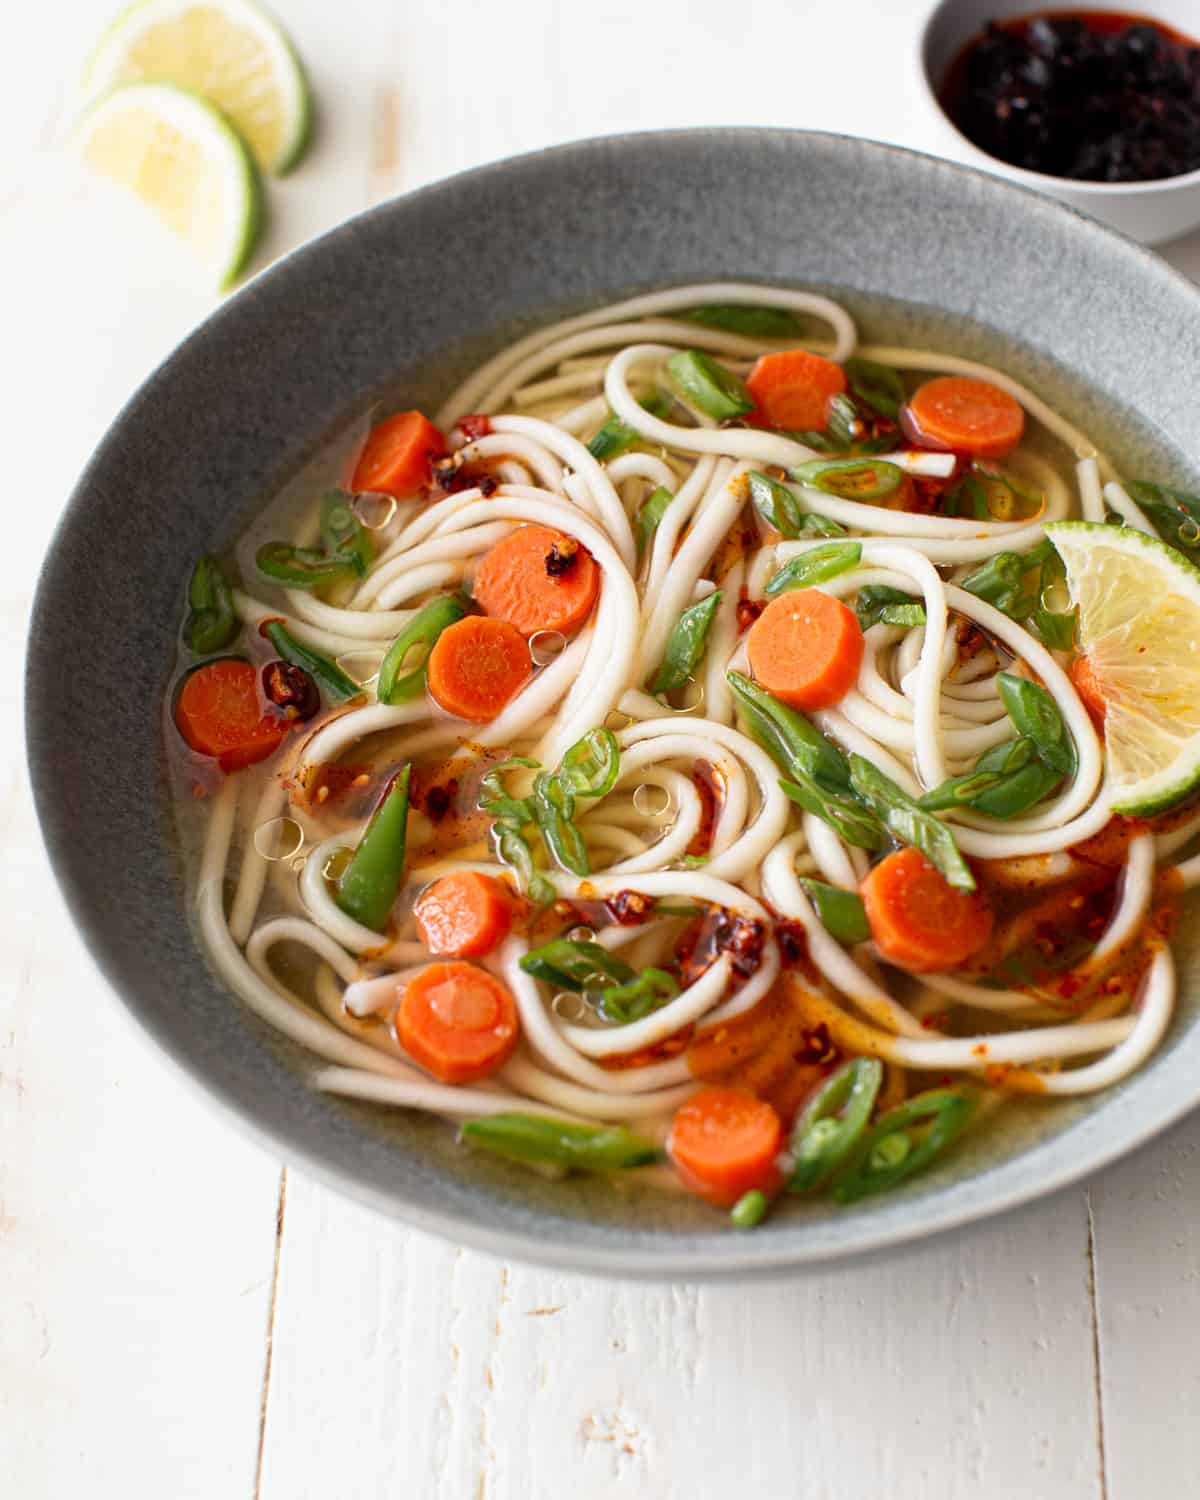 soup with noodles in a grey bowl